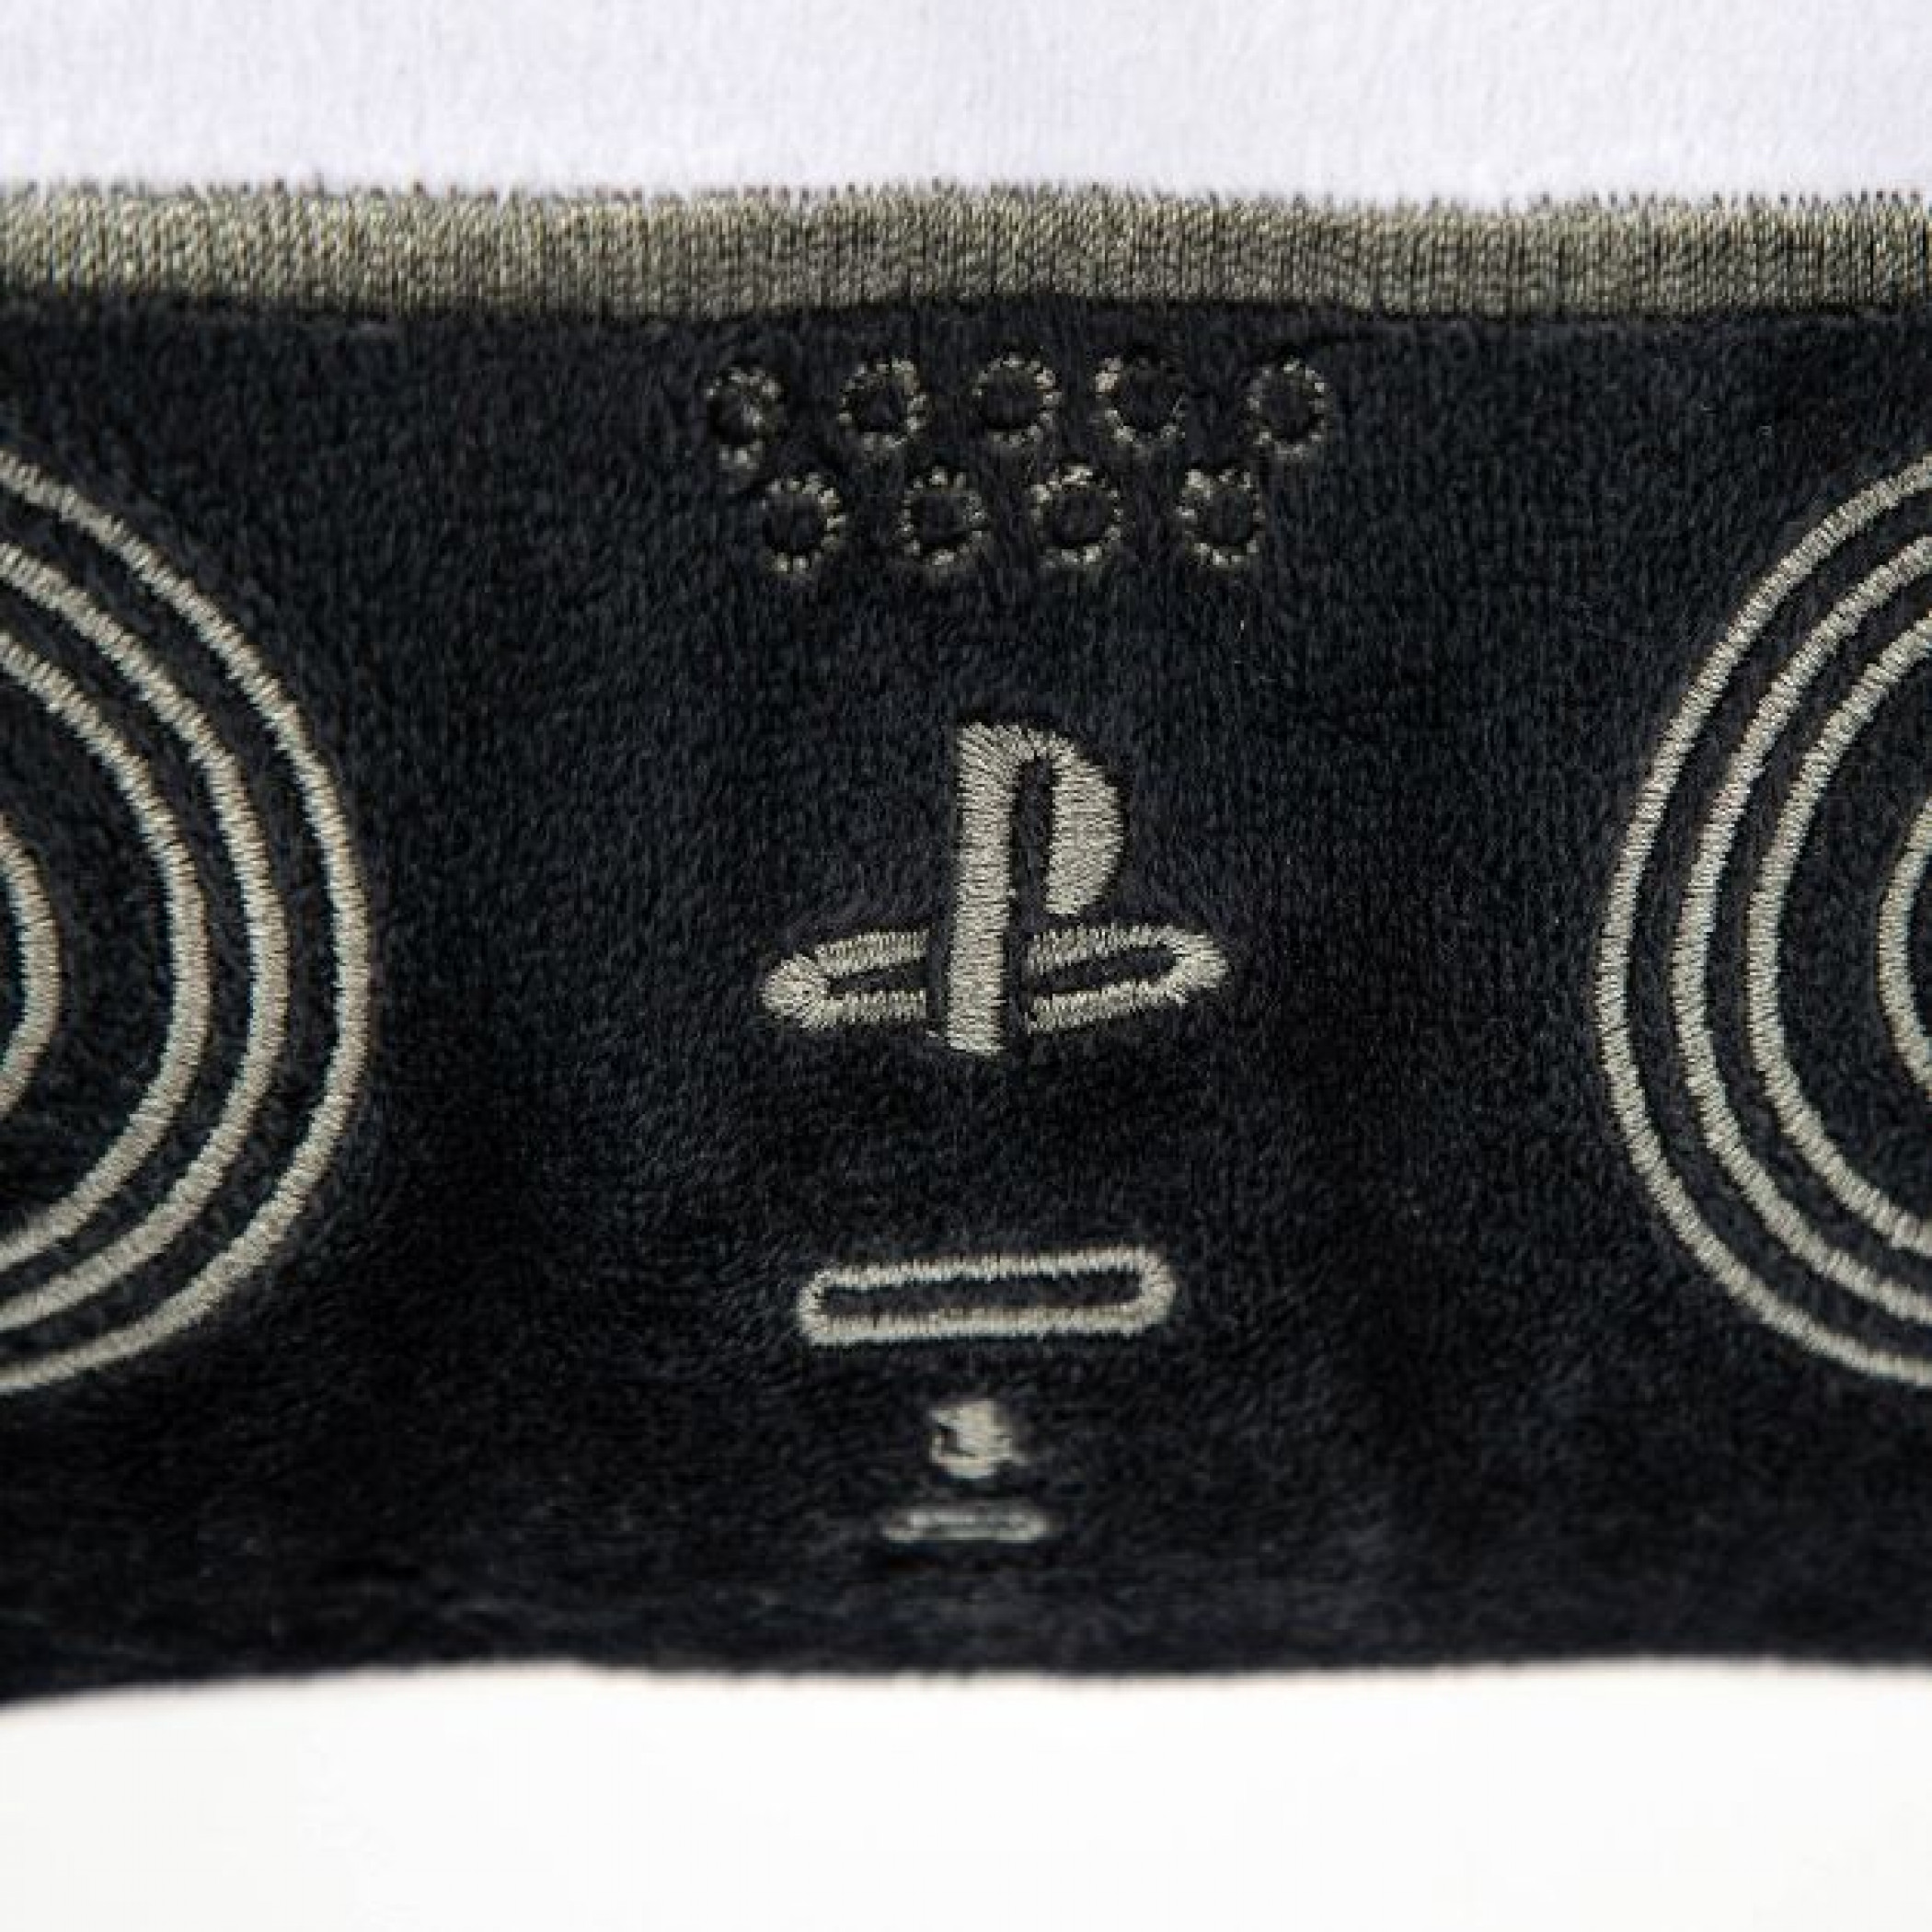 PlayStation 5 Controller Shaped Pillow